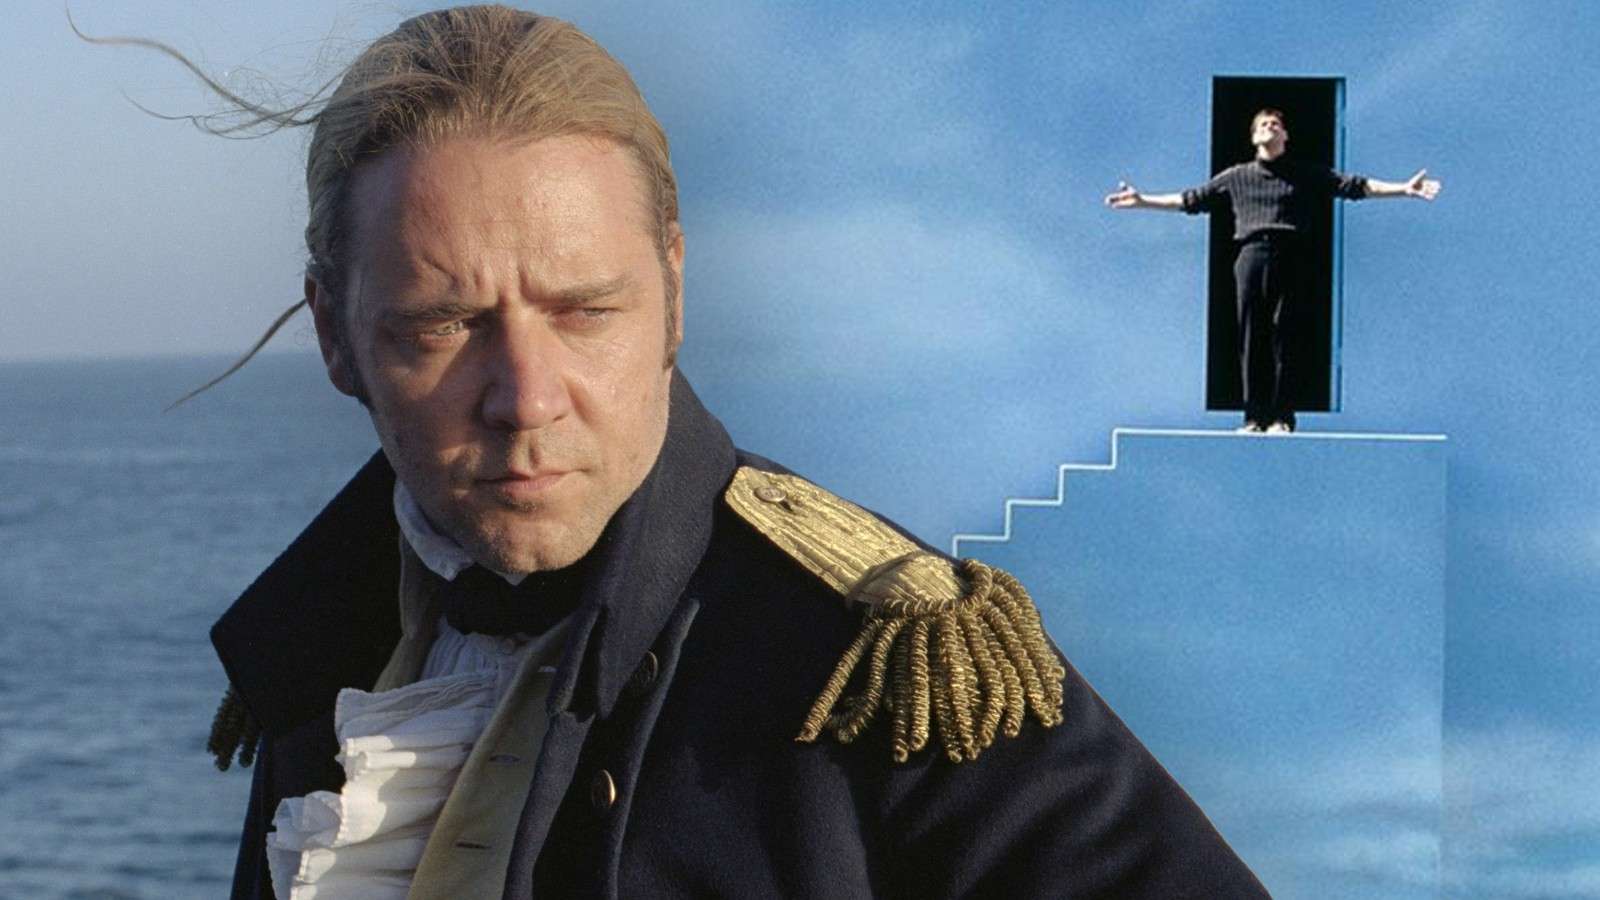 Stills from Master and Commander and The Truman Show, directed by Peter Weir